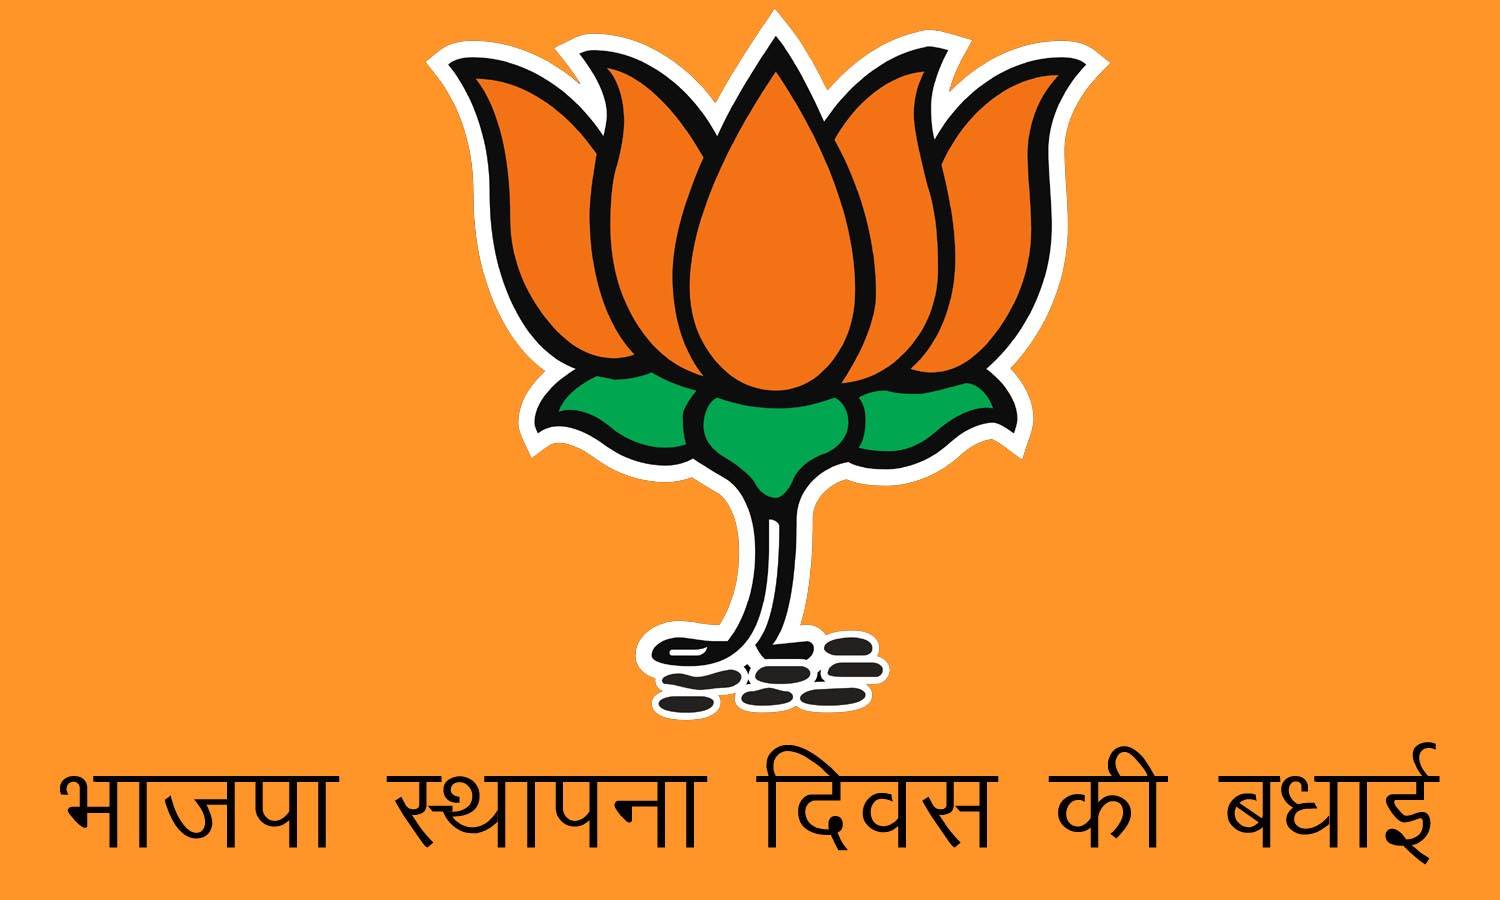 BJP Foundation Day 2023 messages wishes and quotes